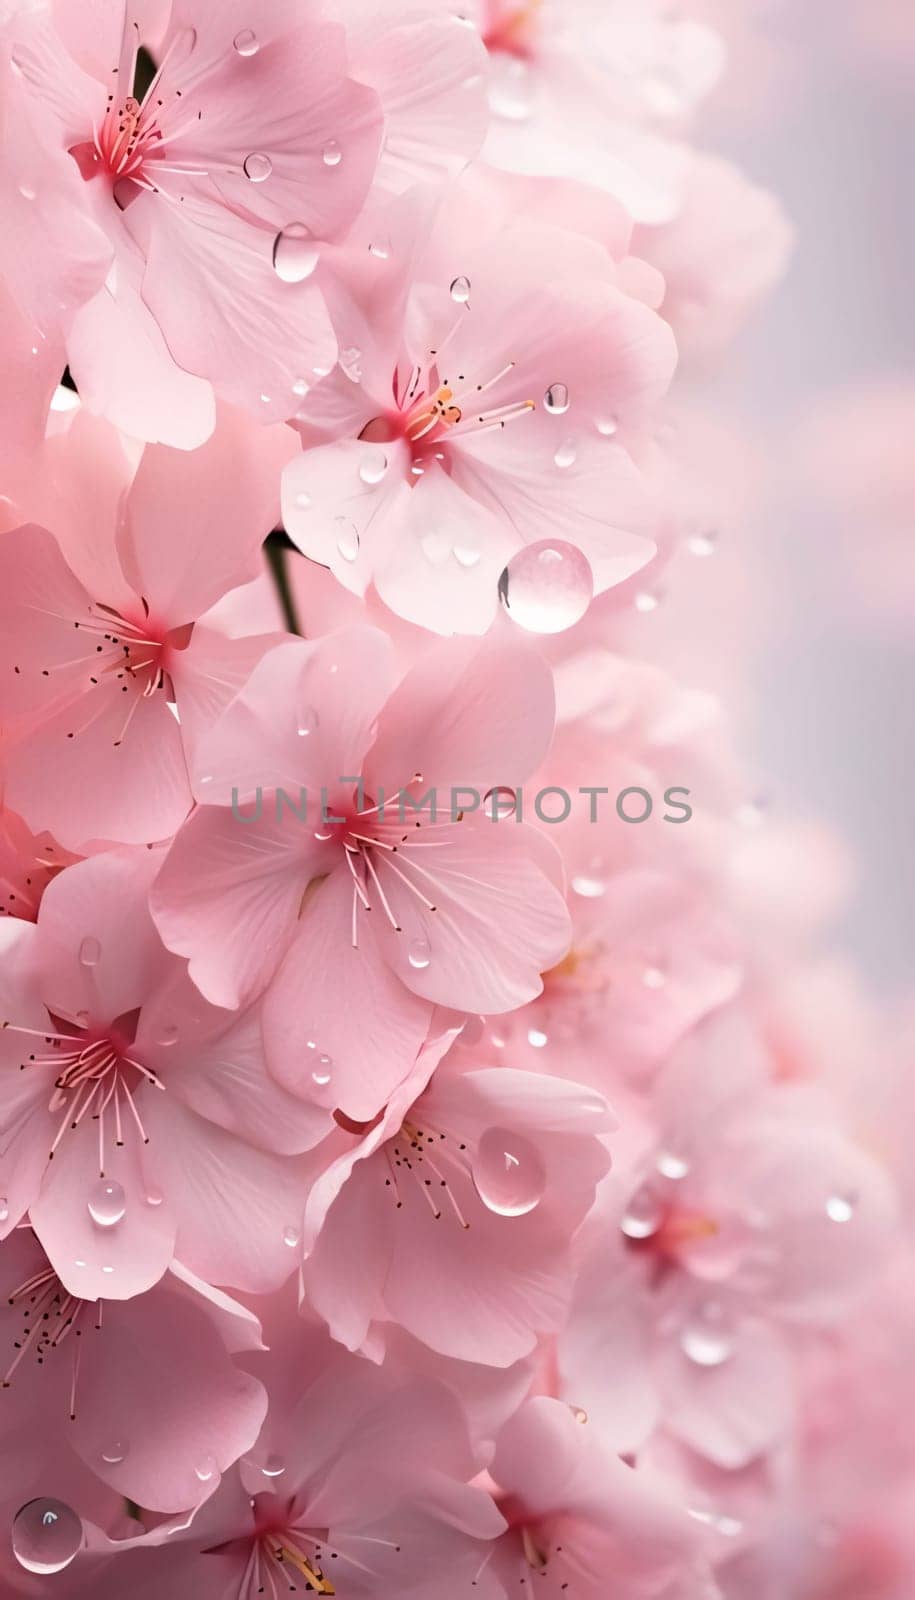 Pink cherry blossoms with drops of water, rain, dew, pink petals close-up view. Flowering flowers, a symbol of spring, new life. by ThemesS